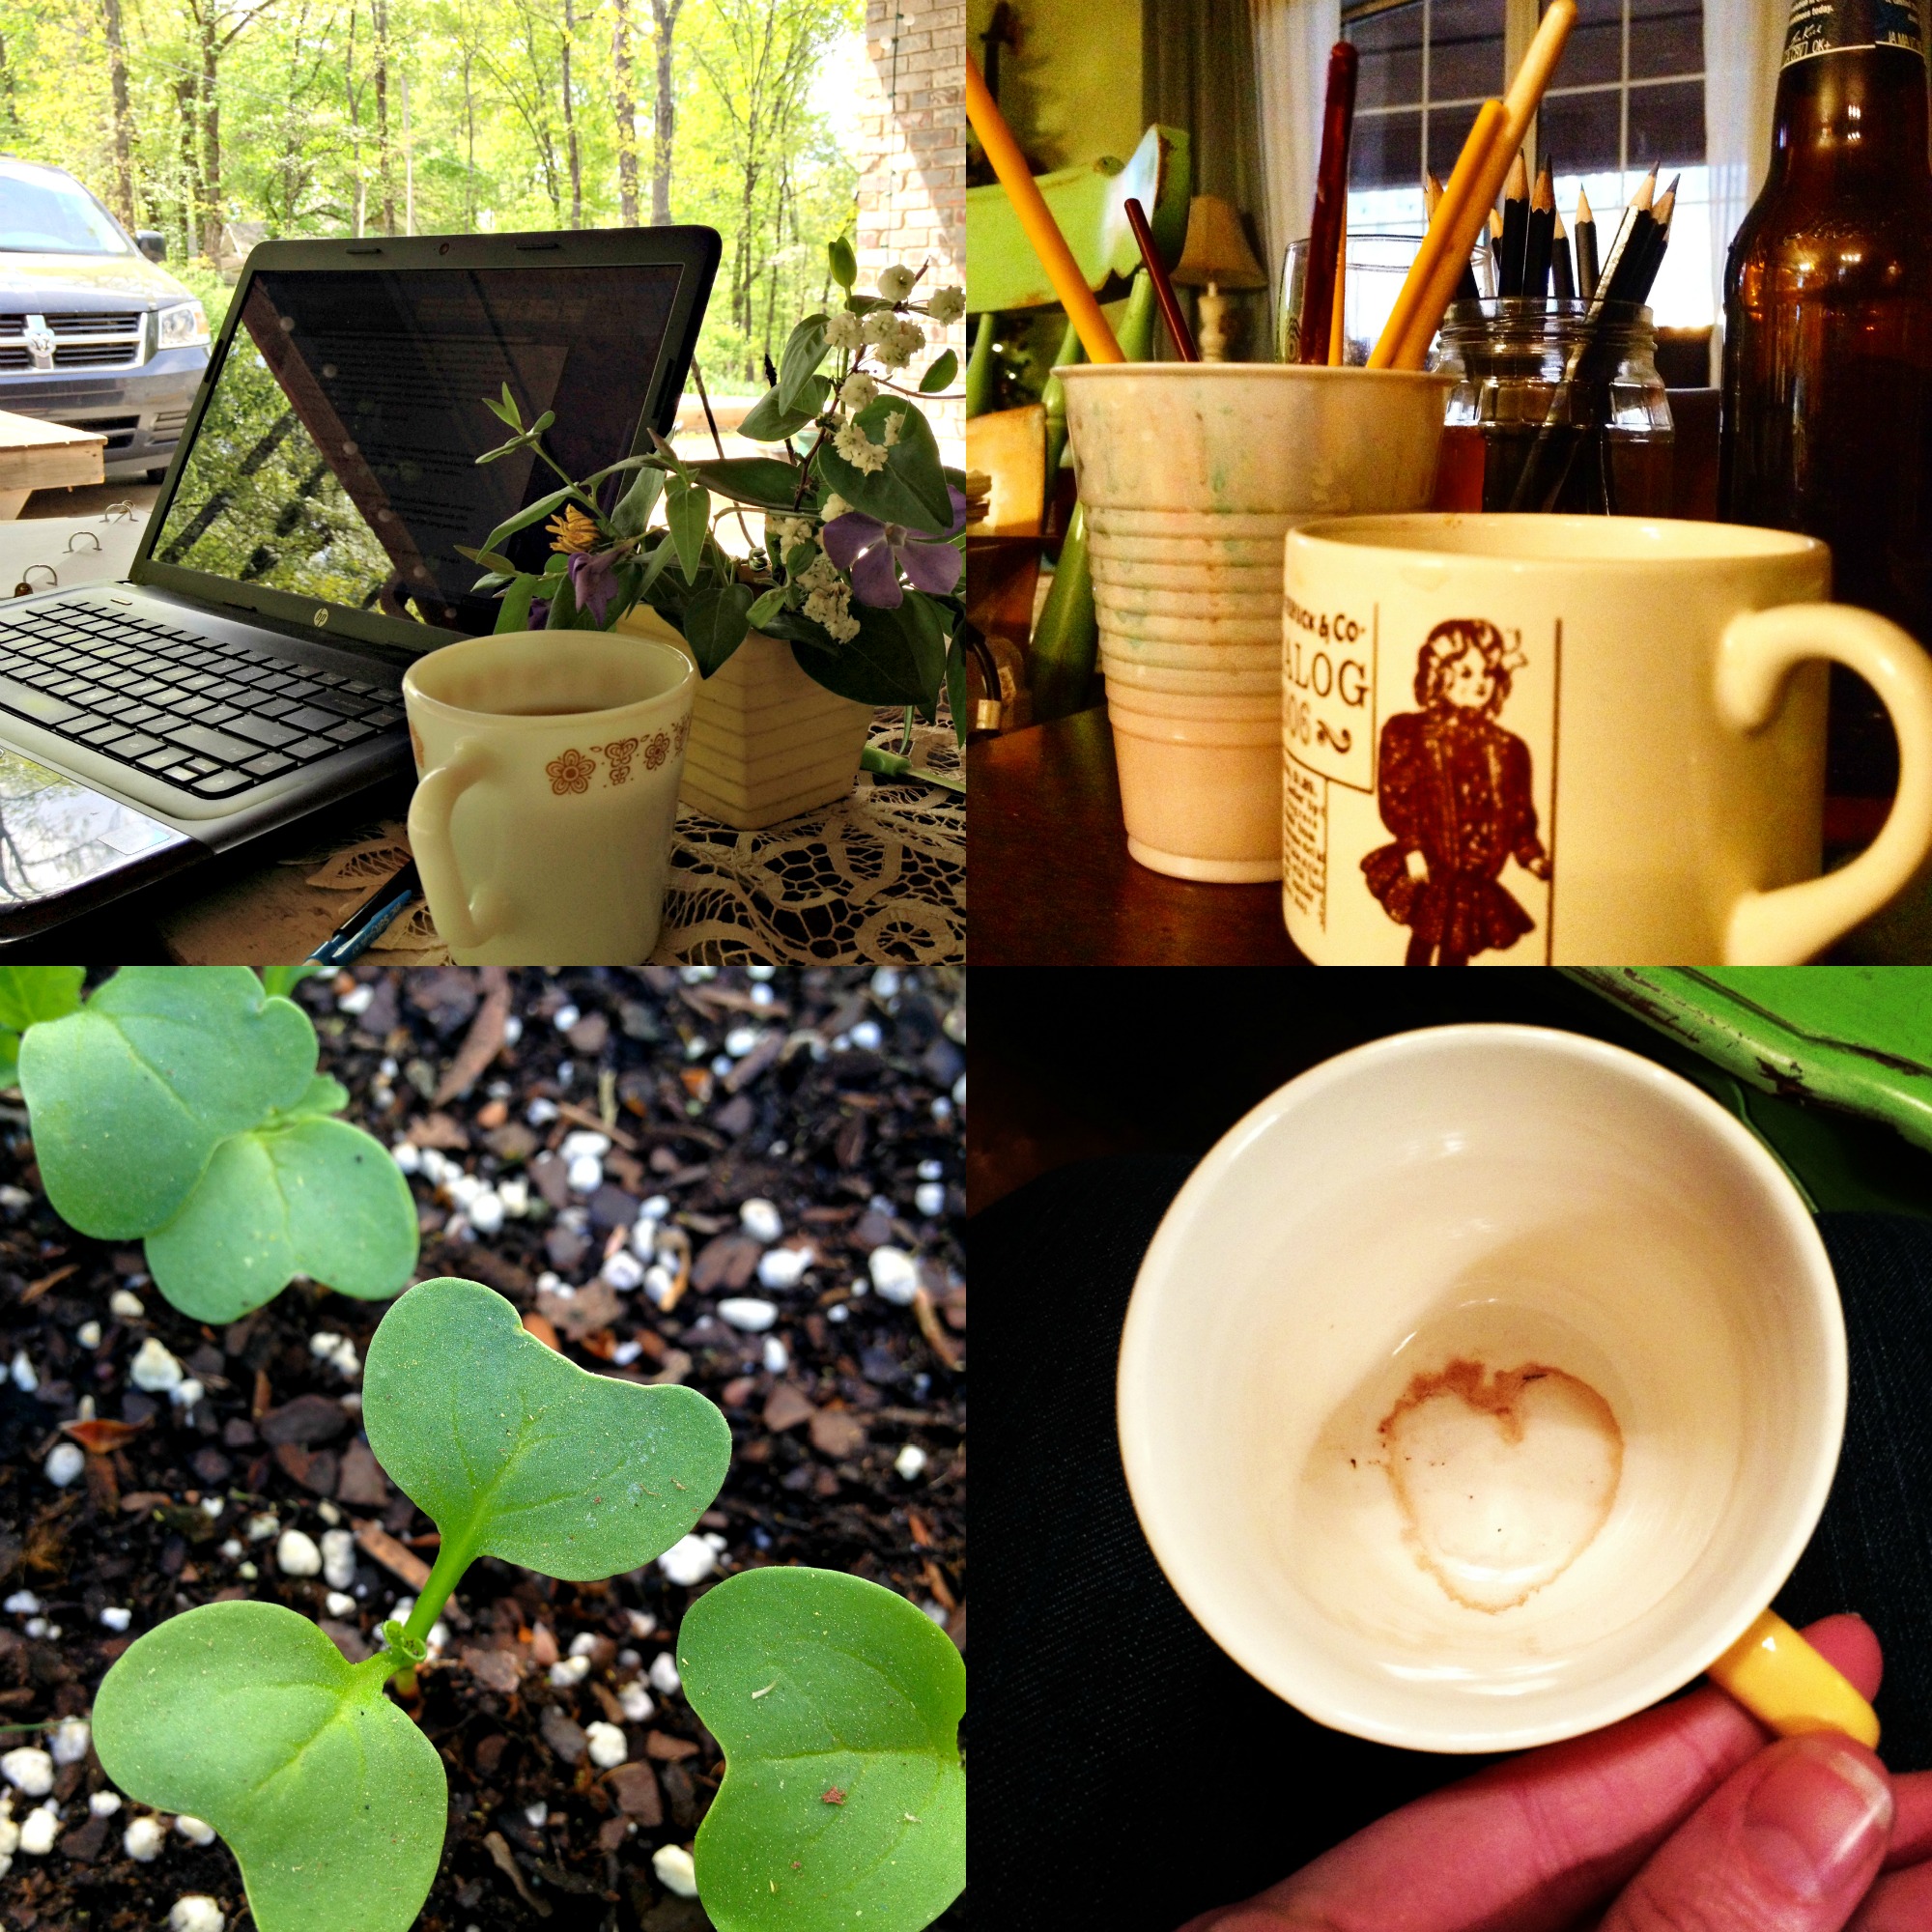 My Day Friday with coffee Collage